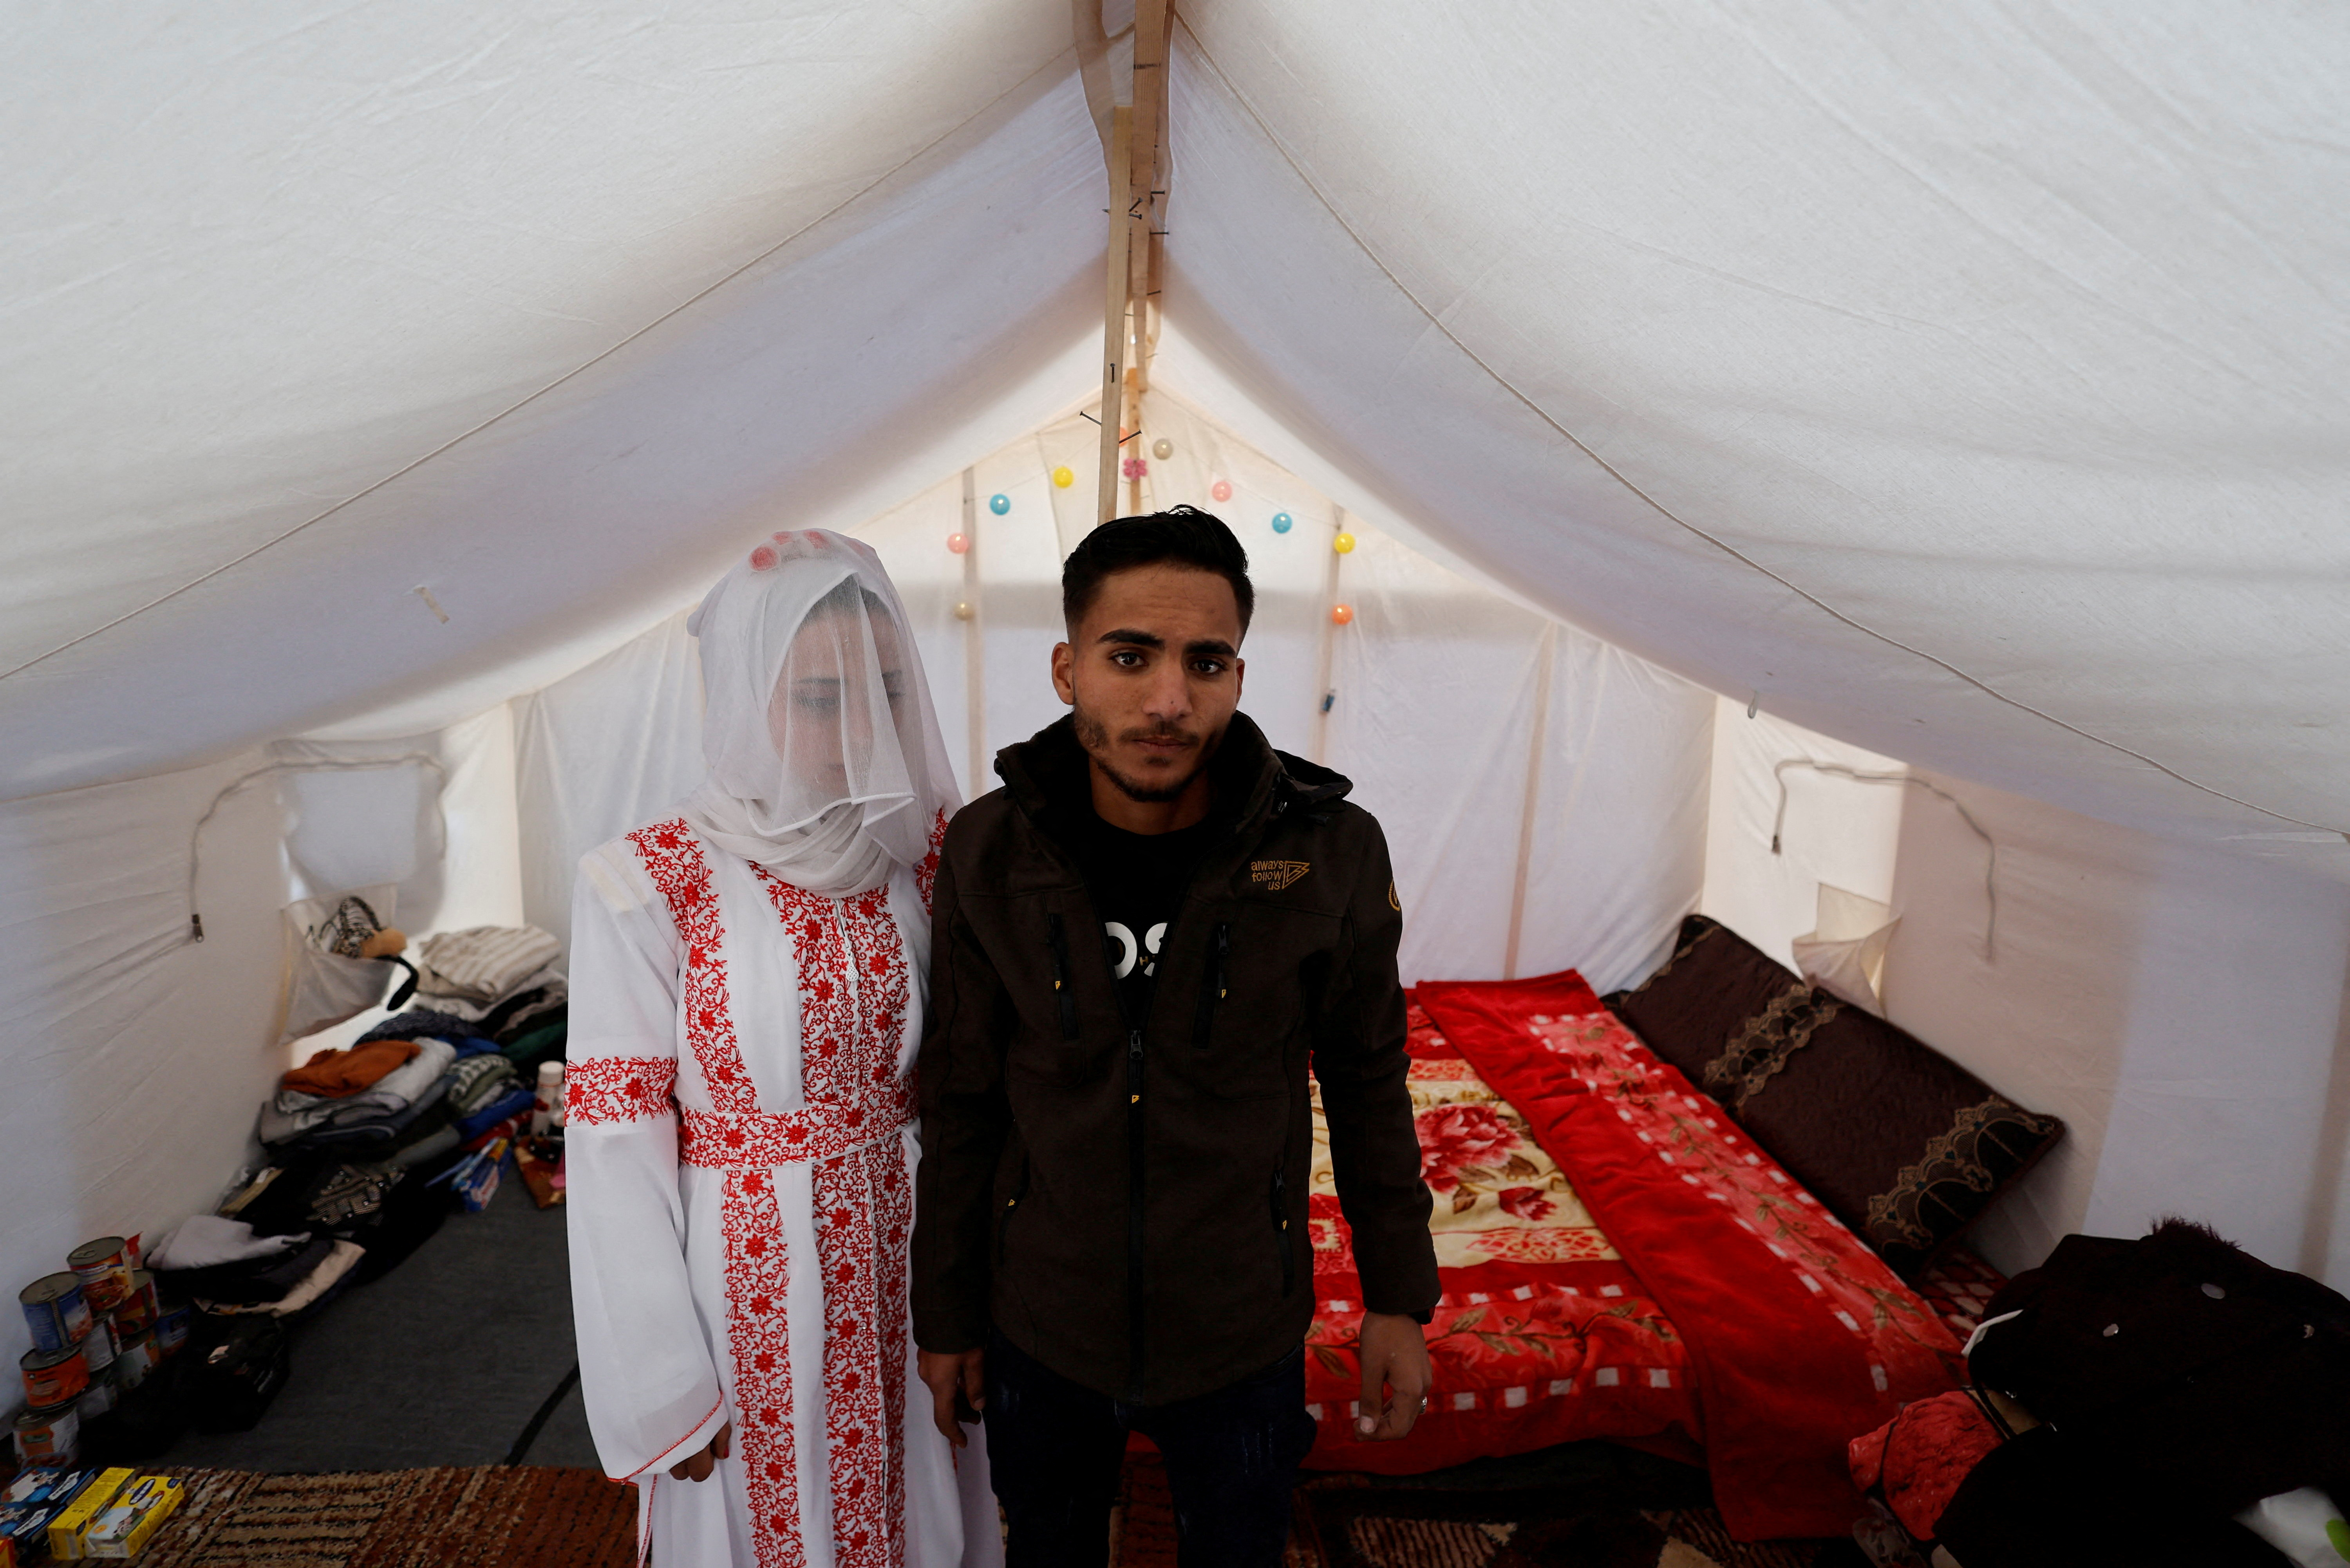 Gaza couple marry in tent city by barbed wire border fence | Reuters